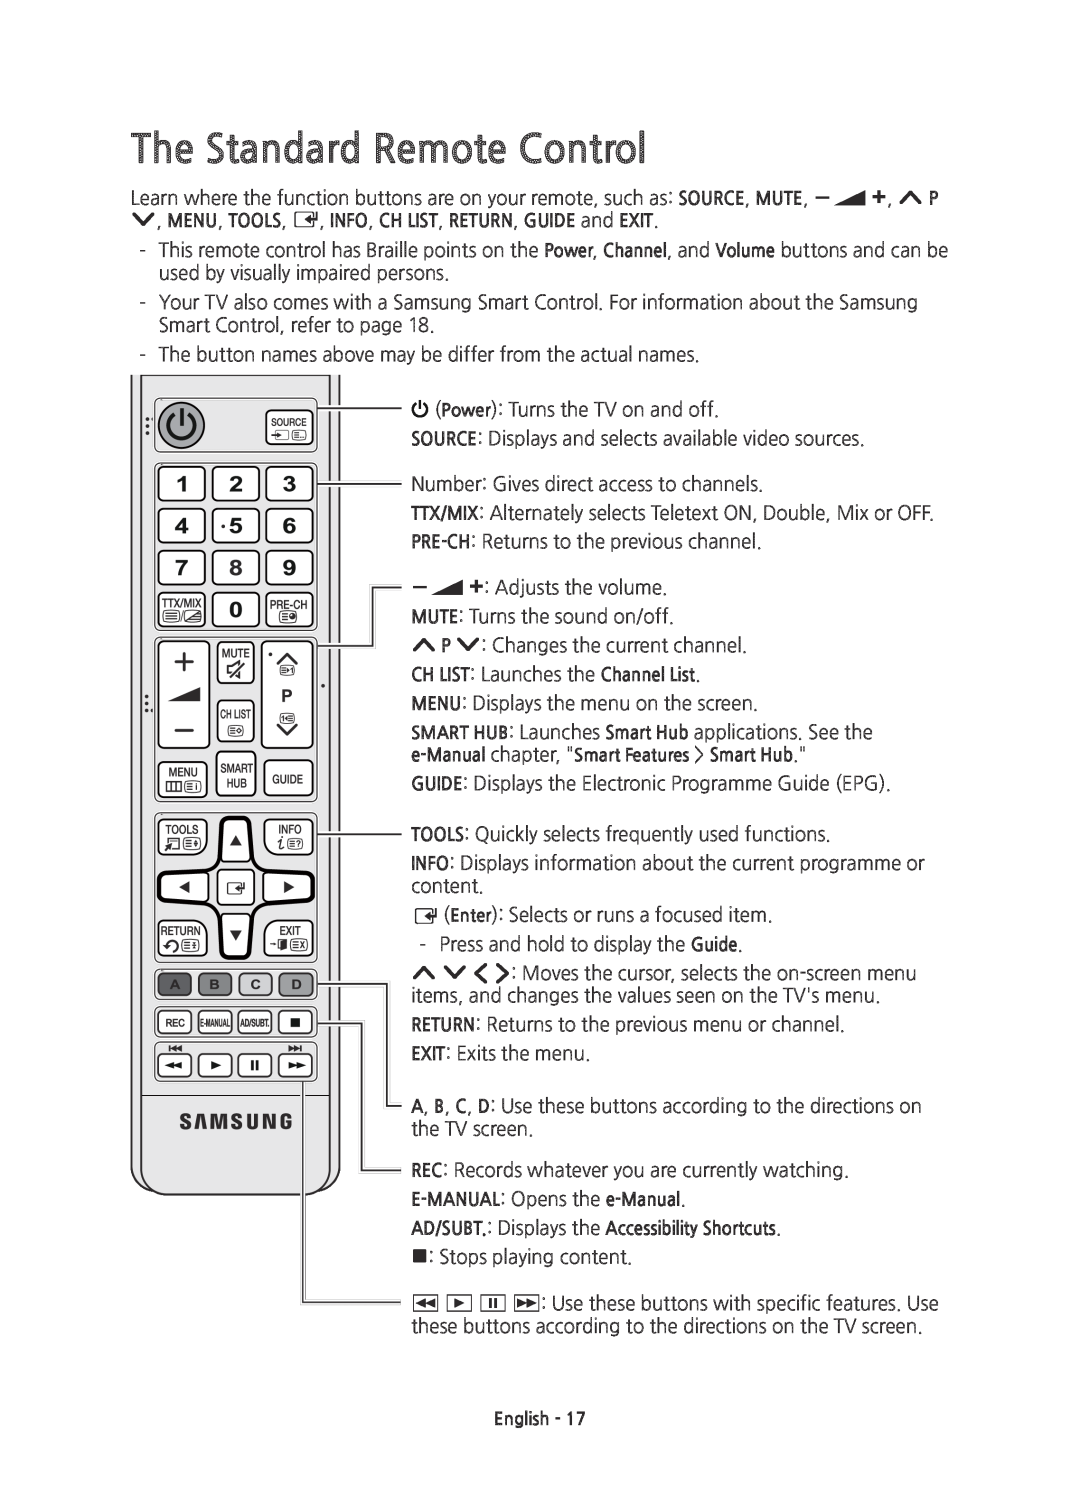 Samsung UE55JS8500TXXC manual The Standard Remote Control, CH LIST Launches the Channel List, E-MANUAL Opens the e-Manual 